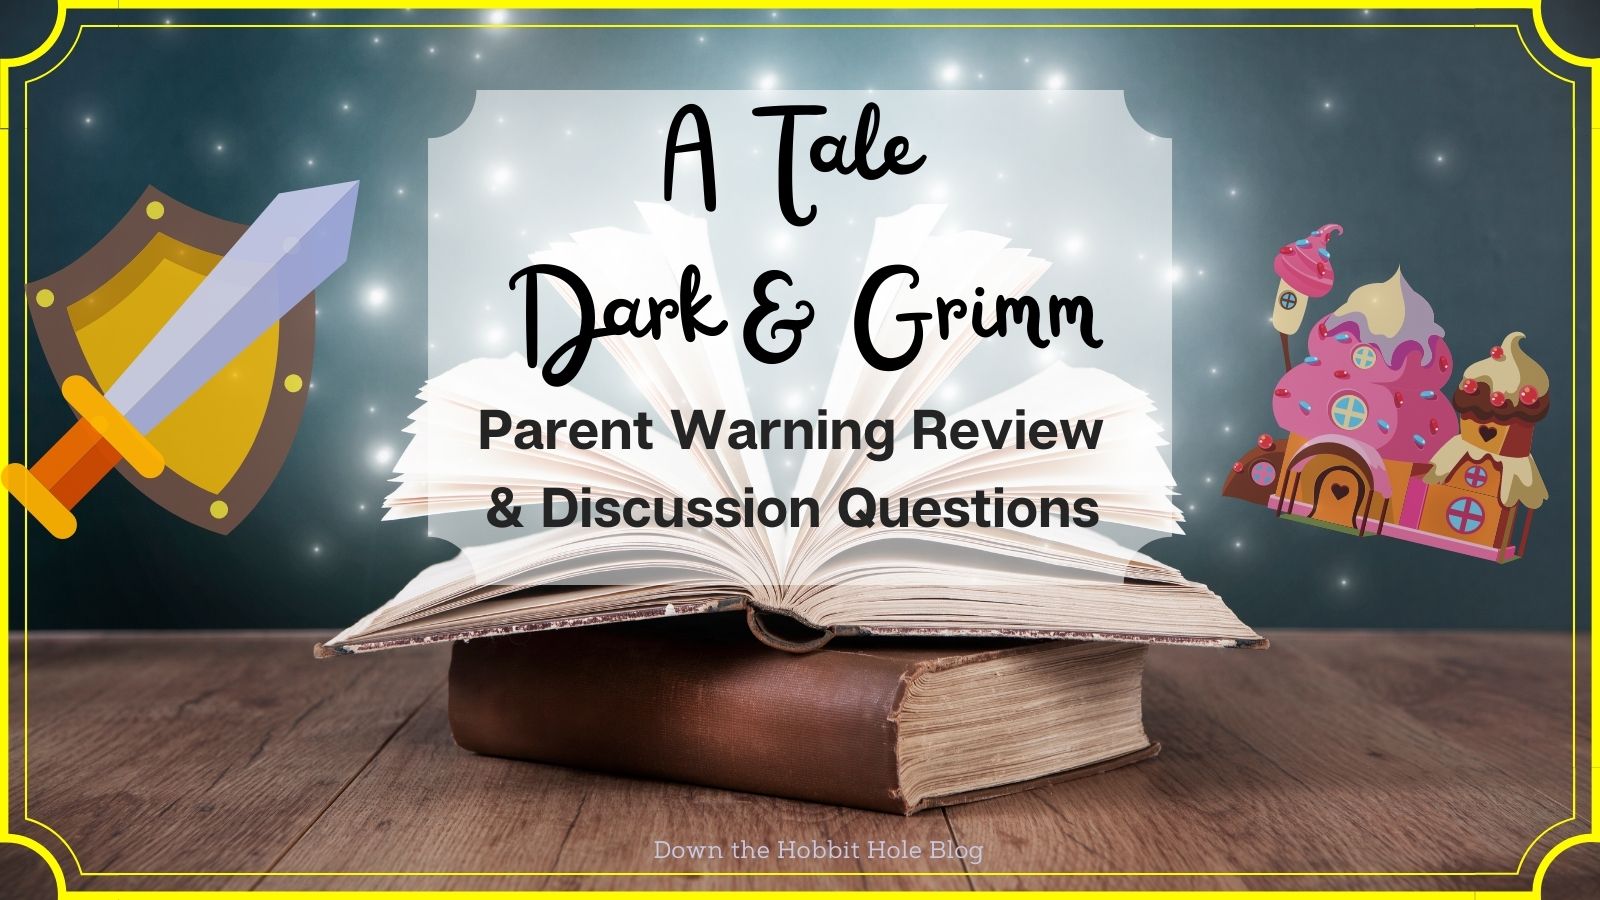 A Tale Dark and Grimm Series Review, A Tale Dark and Grimm on Netflix Family, Grimm Fairytale remakes